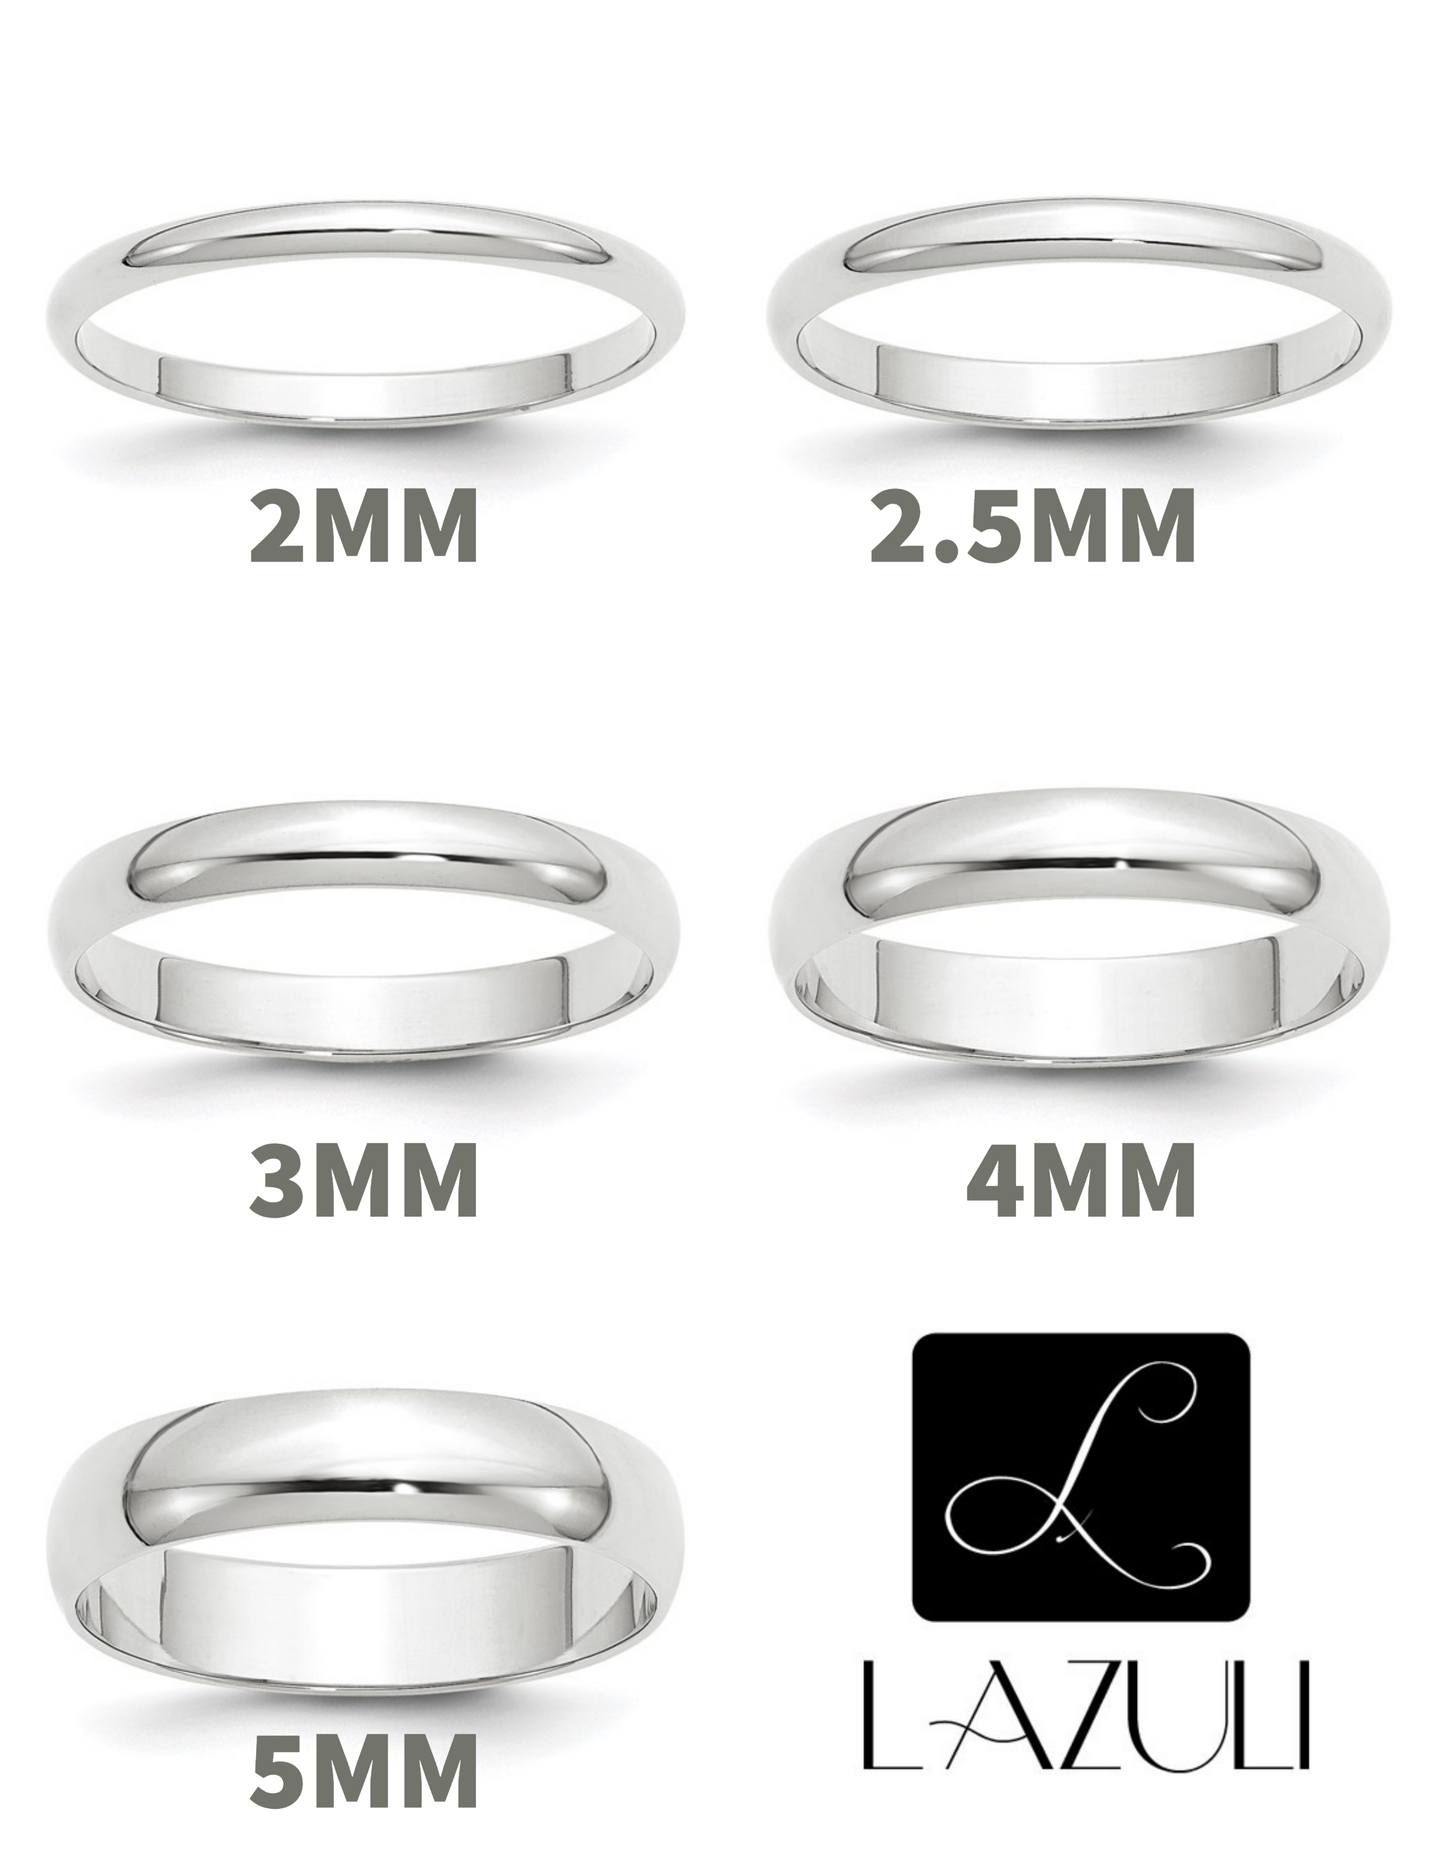 How to wear engagement and wedding rings